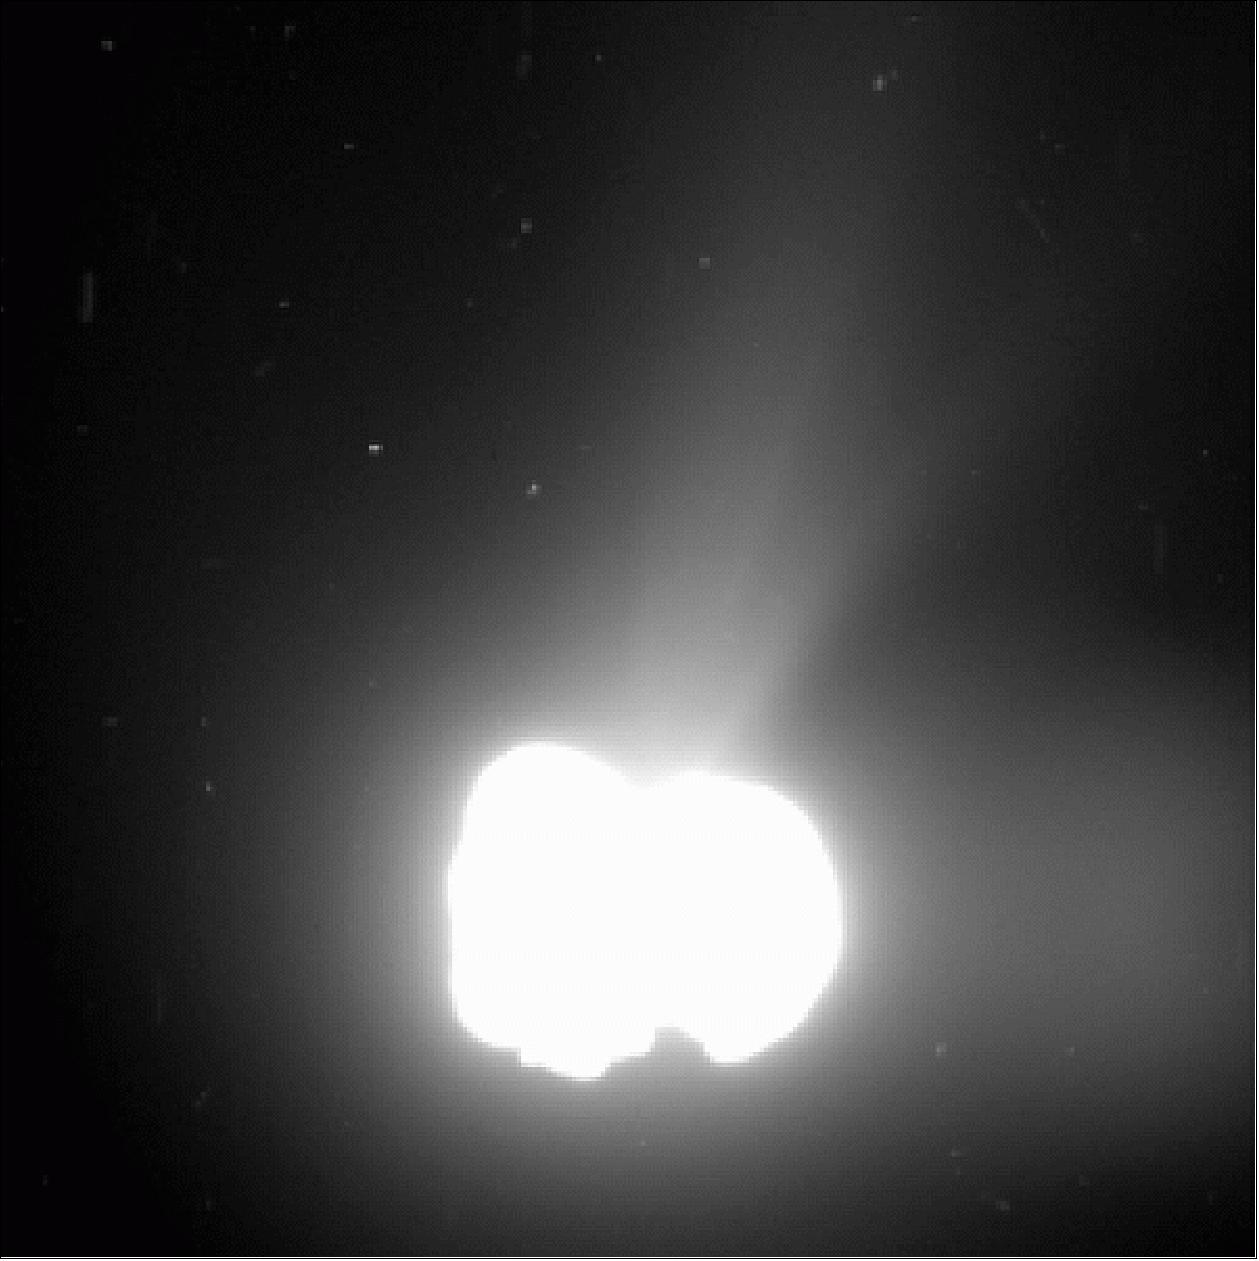 Figure 178: The image was taken by Rosetta’s OSIRIS wide-angle camera from a distance of 550 km (image credit: ESA, Rosetta, MPS for OSIRIS Team MPS, UPD, LAM, IAA SSO, INTA, UPM, DASP, IDA)